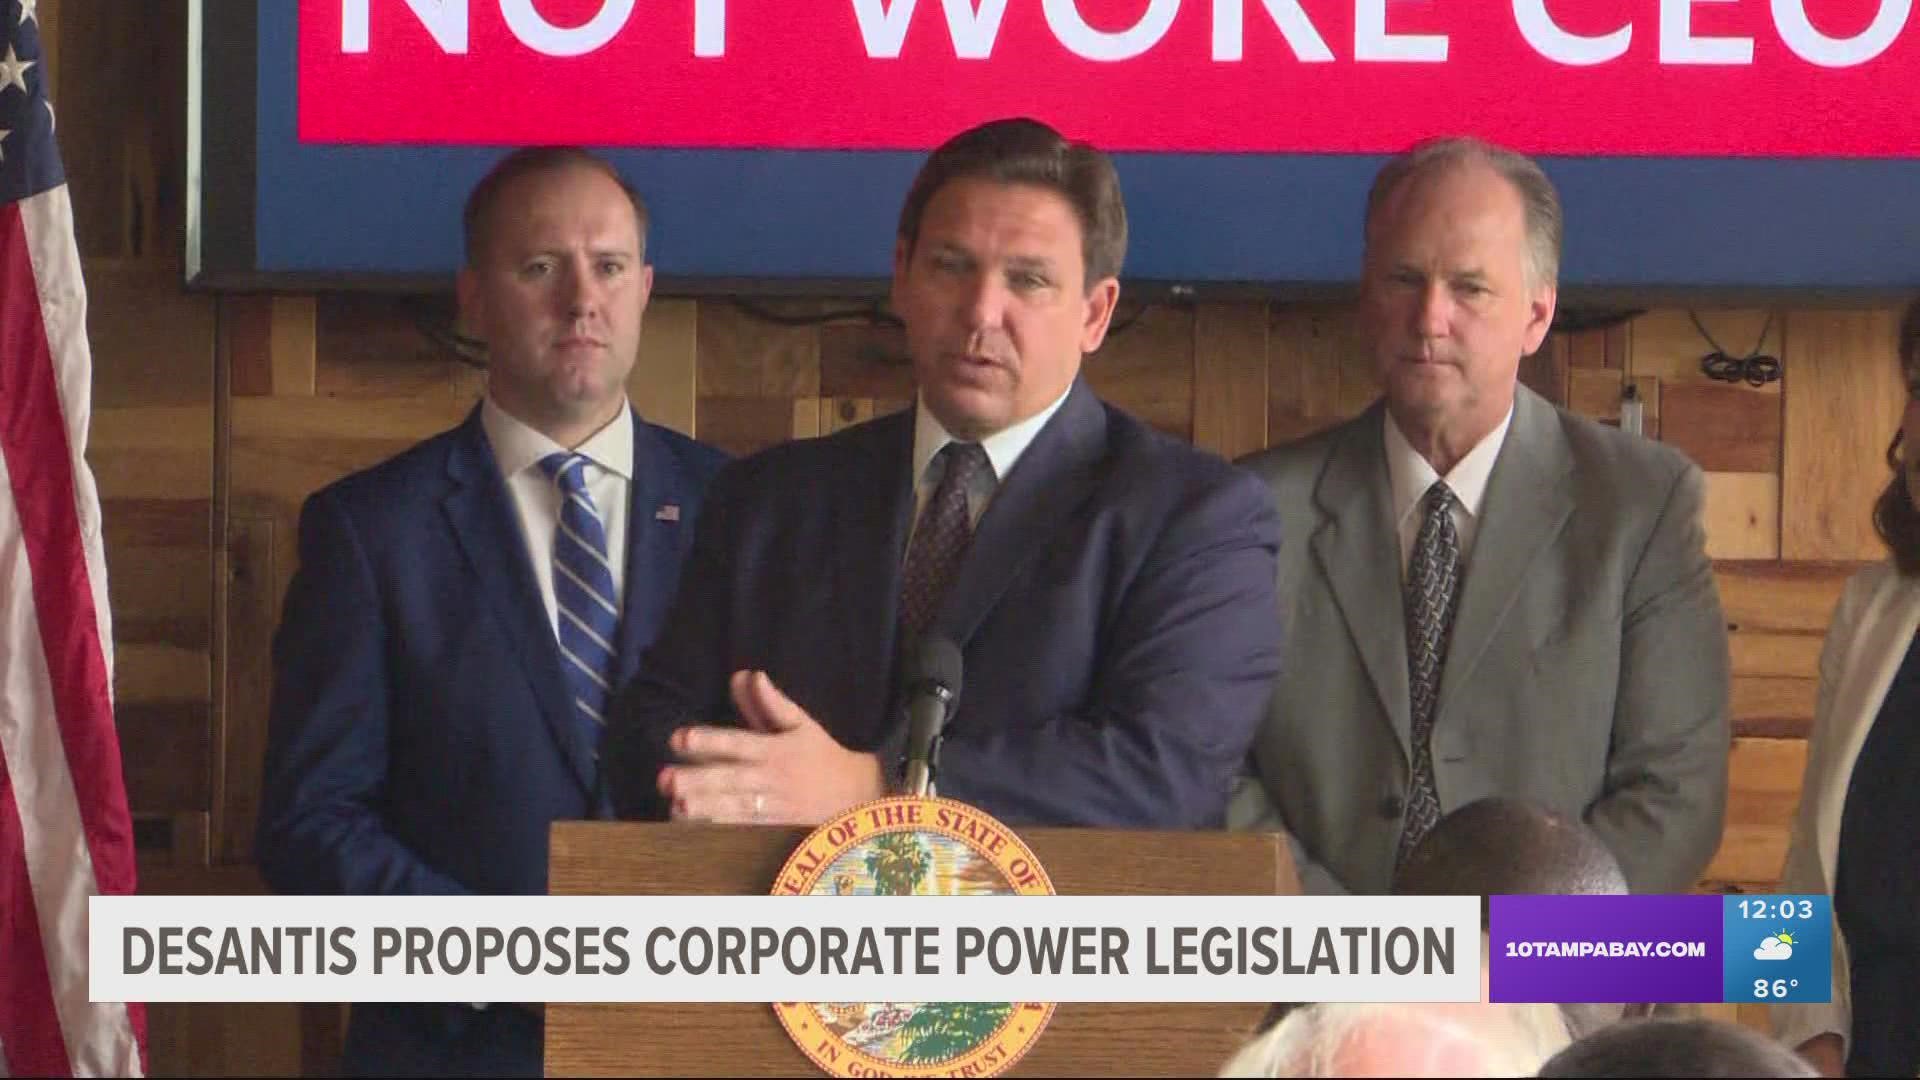 Just hours ago, the governor laid out a proposal he's calling "People Before Corporate Power."